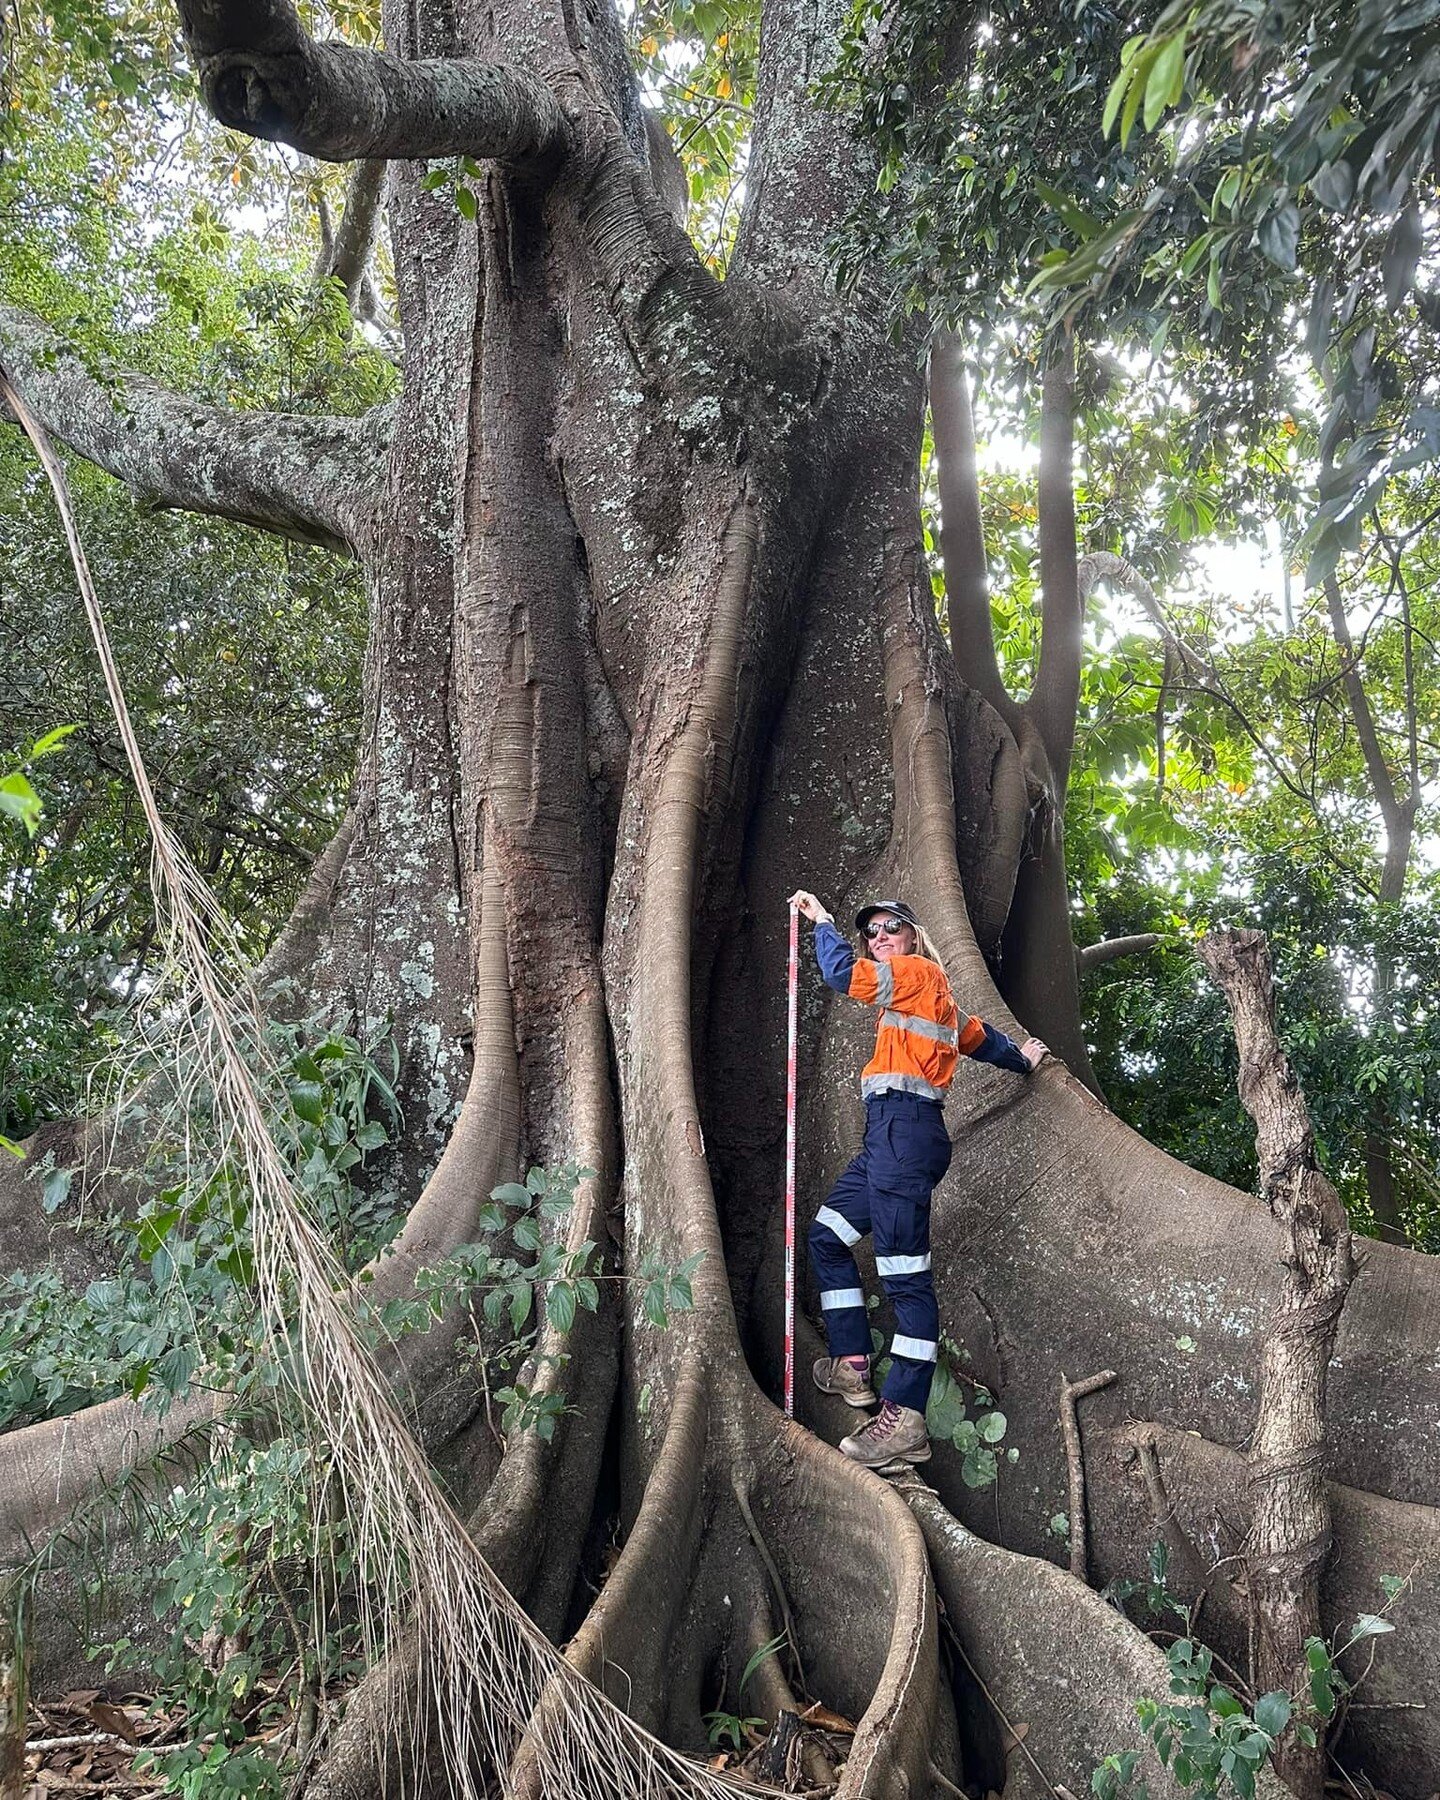 Thanks to our field team for sending in this great photo!

Whilst completing A Duty of Care assessment, Archaeologist Emily came across this large Fig Tree. She grabbed a tape measure and popped in the shot to provide some context for the sheer size 